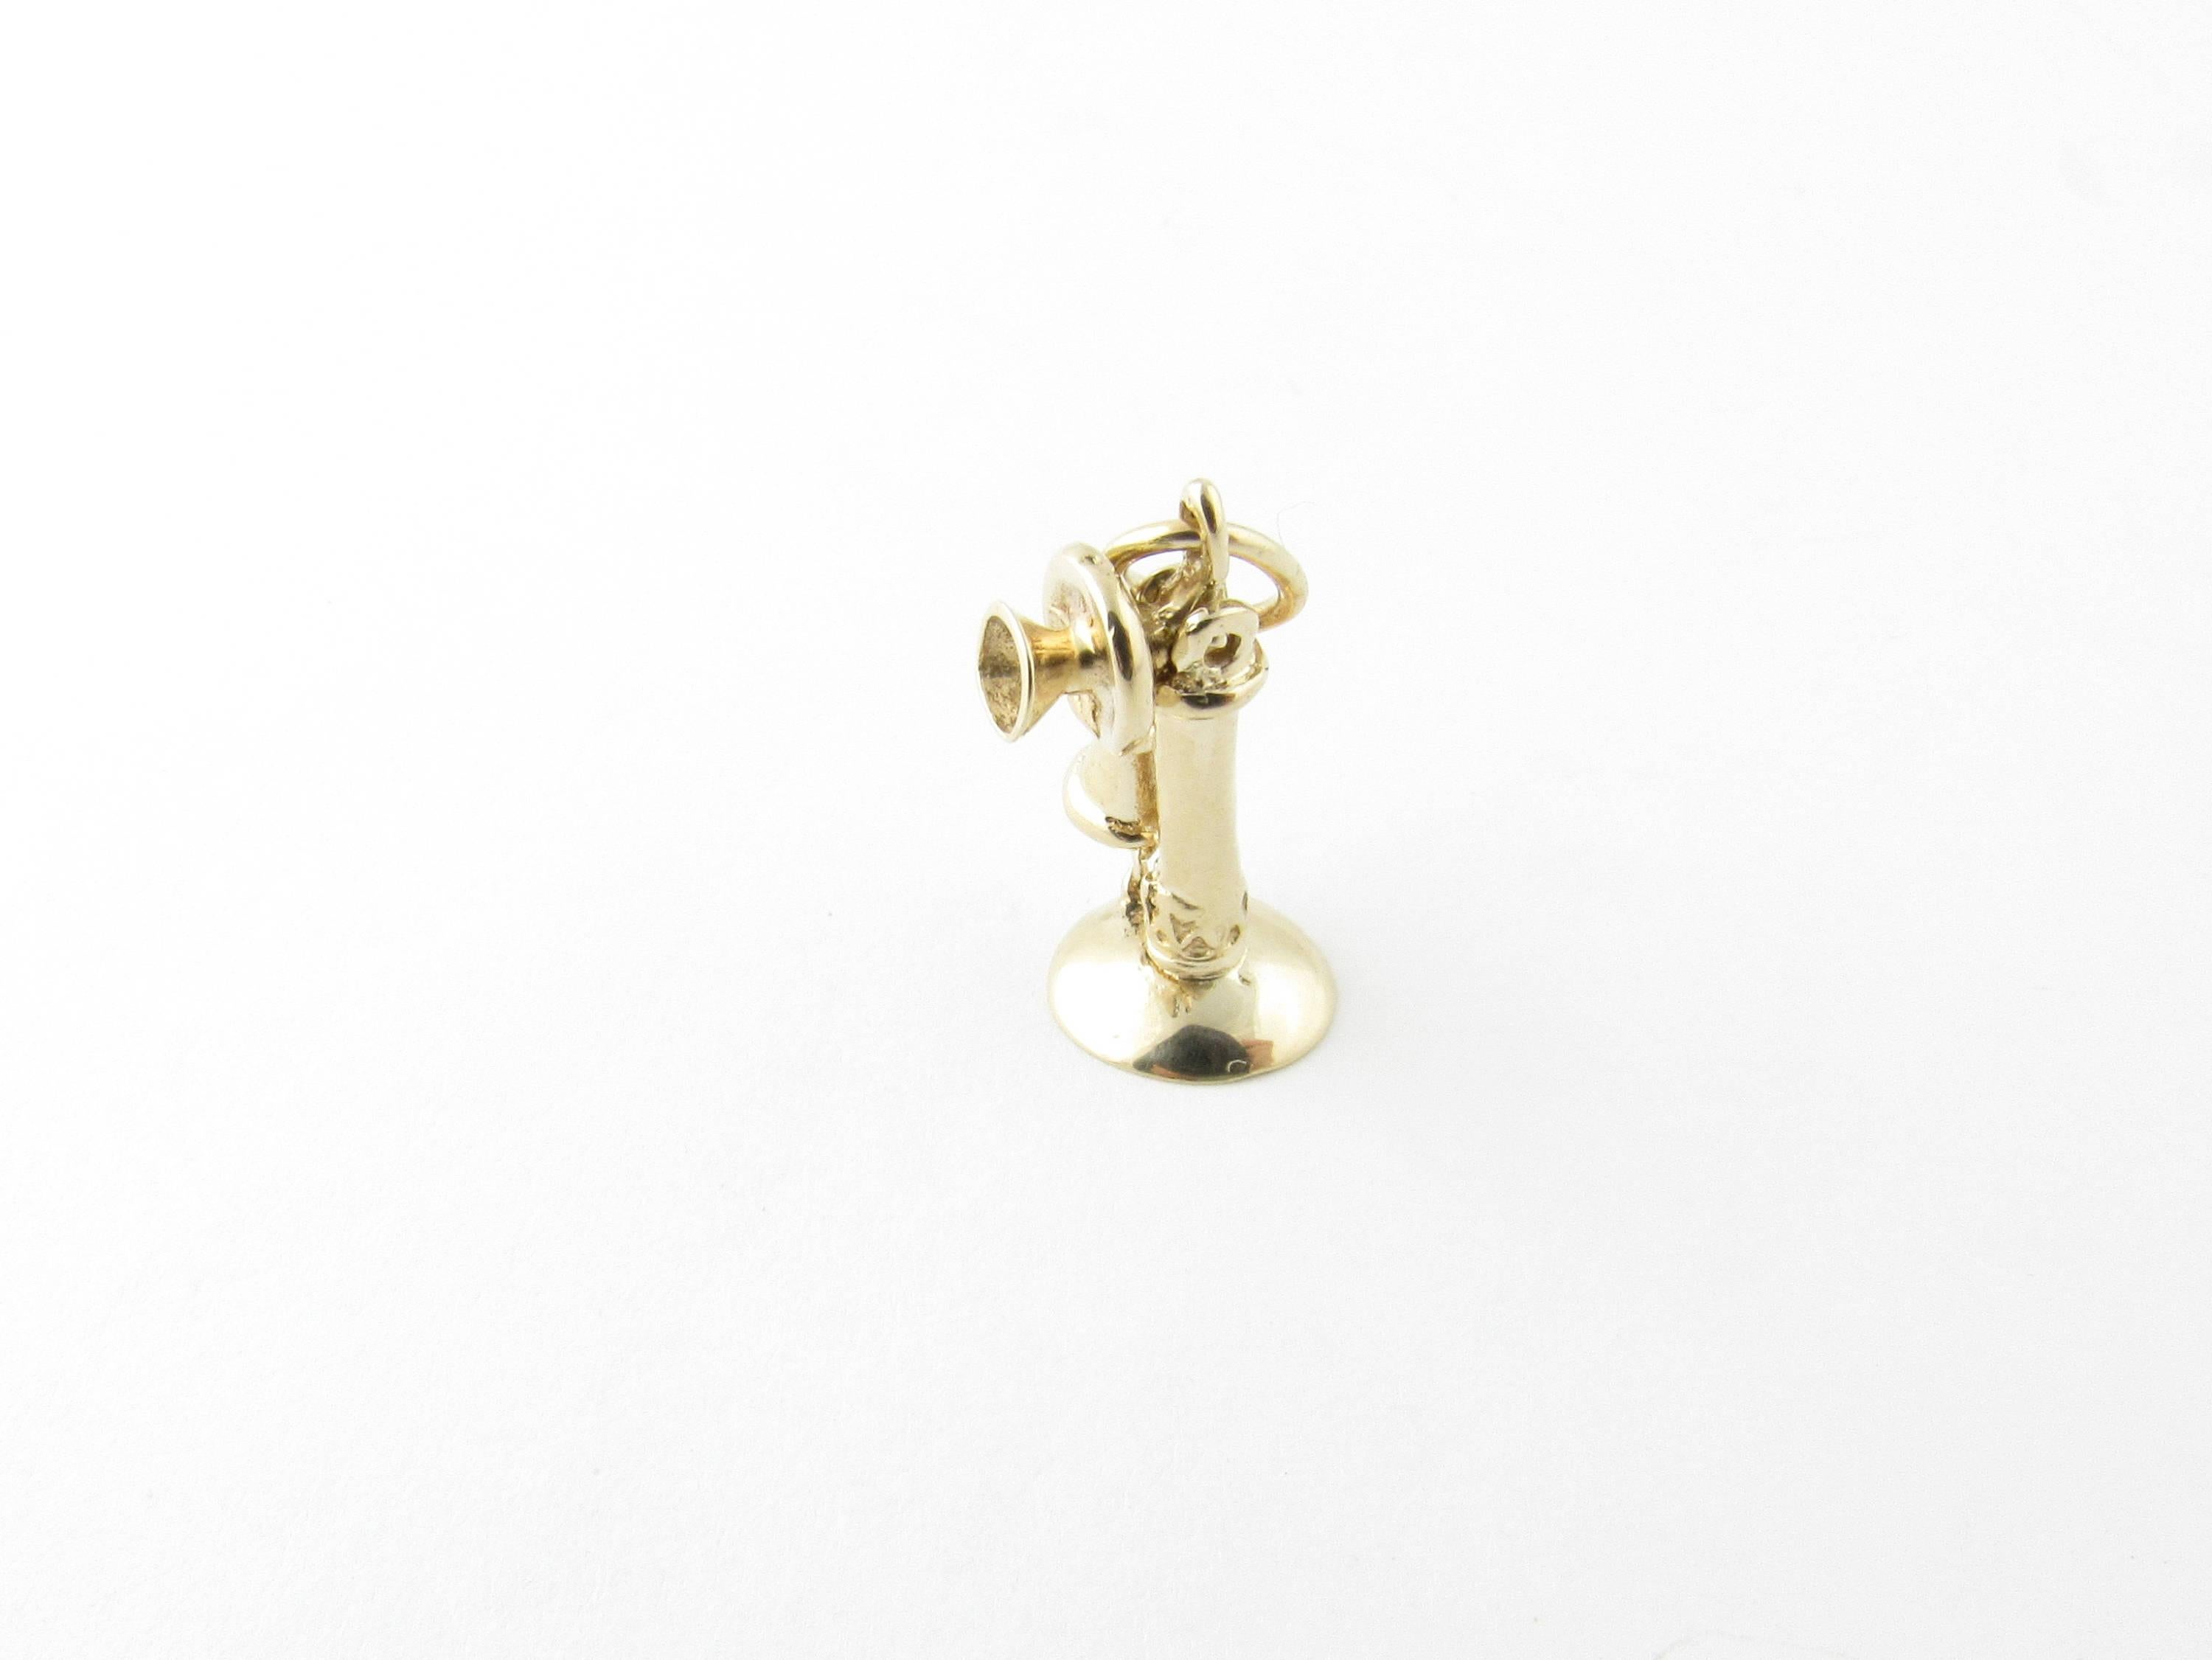 Vintage 14 Karat Yellow Gold Old-Fashioned Telephone Charm-

Go back to a simpler time!

This lovely 3D charm features a miniature old-fashioned telephone meticulously detailed in 14K yellow gold.

Size:  20 mm x  9 mm (actual charm)

Weight:  1.5